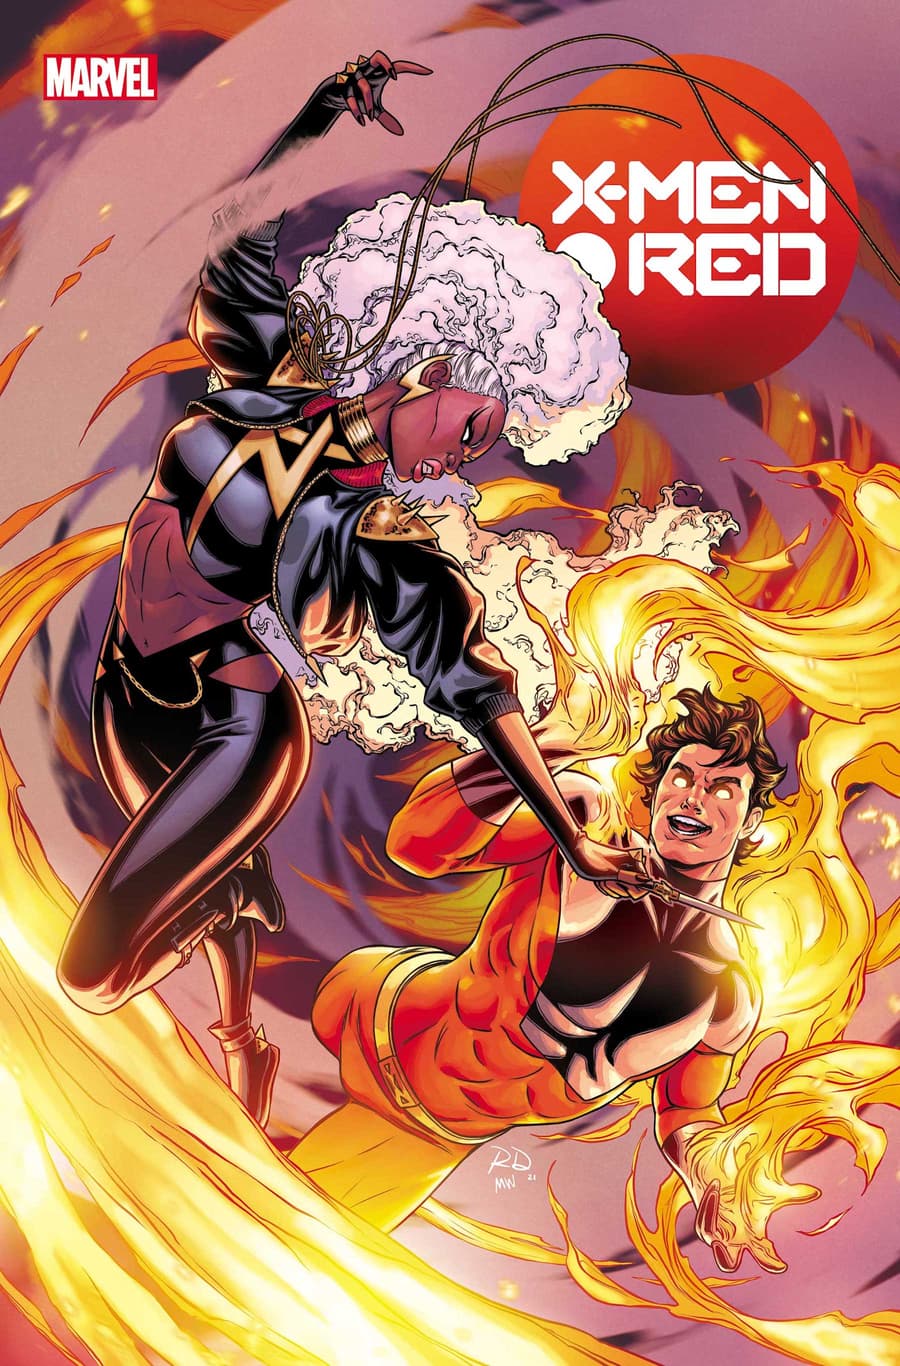 X-MEN RED #2 Cover by RUSSELL DAUTERMAN